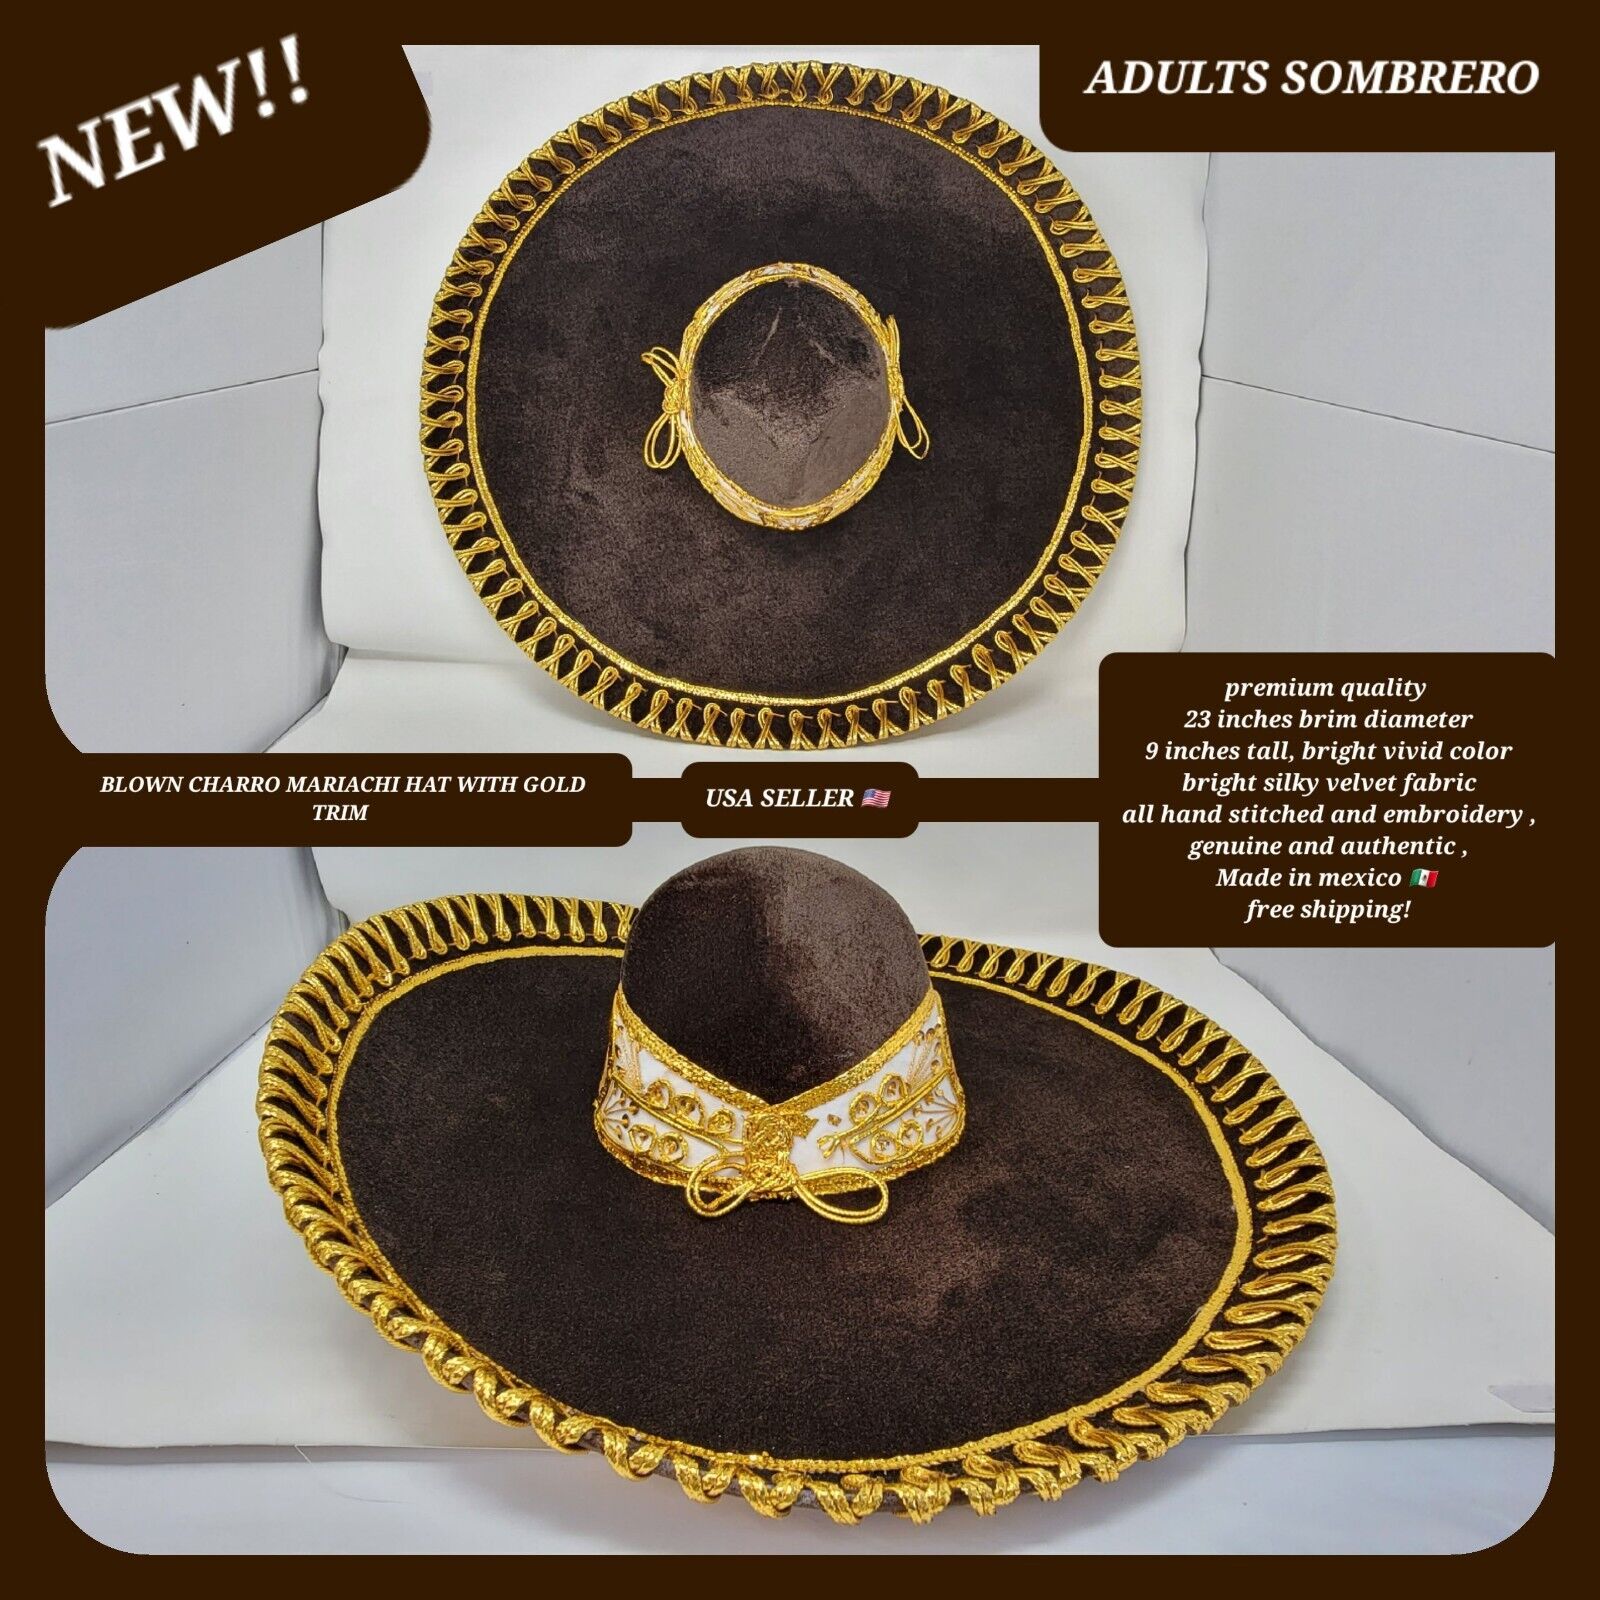 Plain brown with gold trim adults sombrero charro mariachi hat